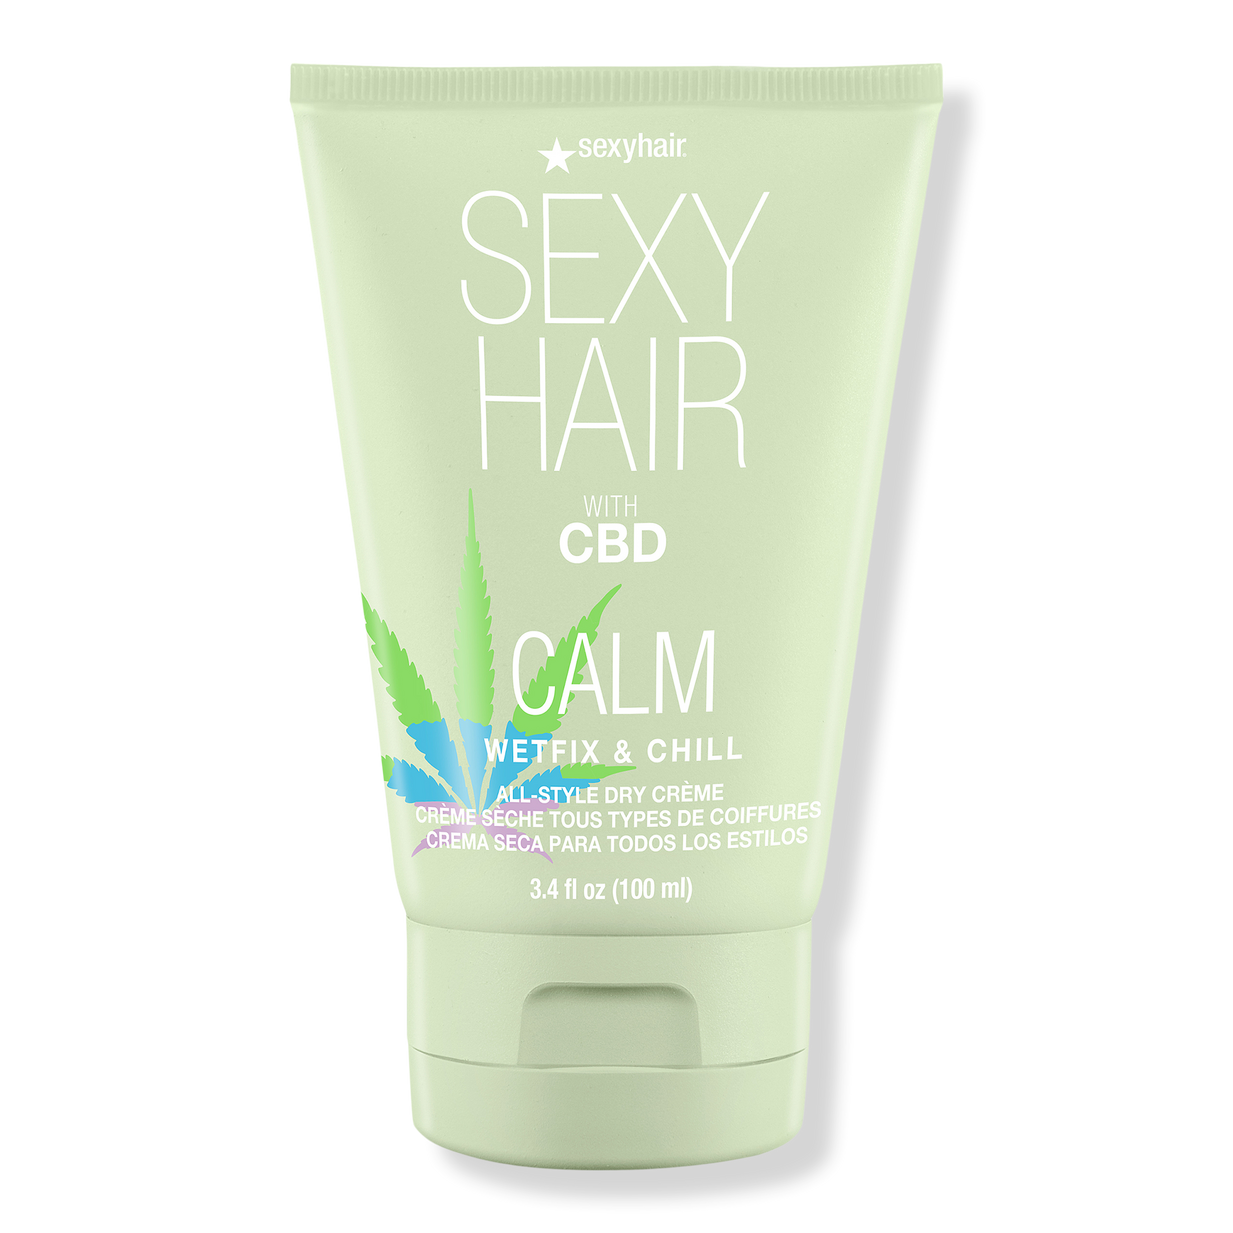 Calm Sexy Hair Wetfix & Chill All-Style Dry Creme with CBD - Sexy Hair |  Ulta Beauty